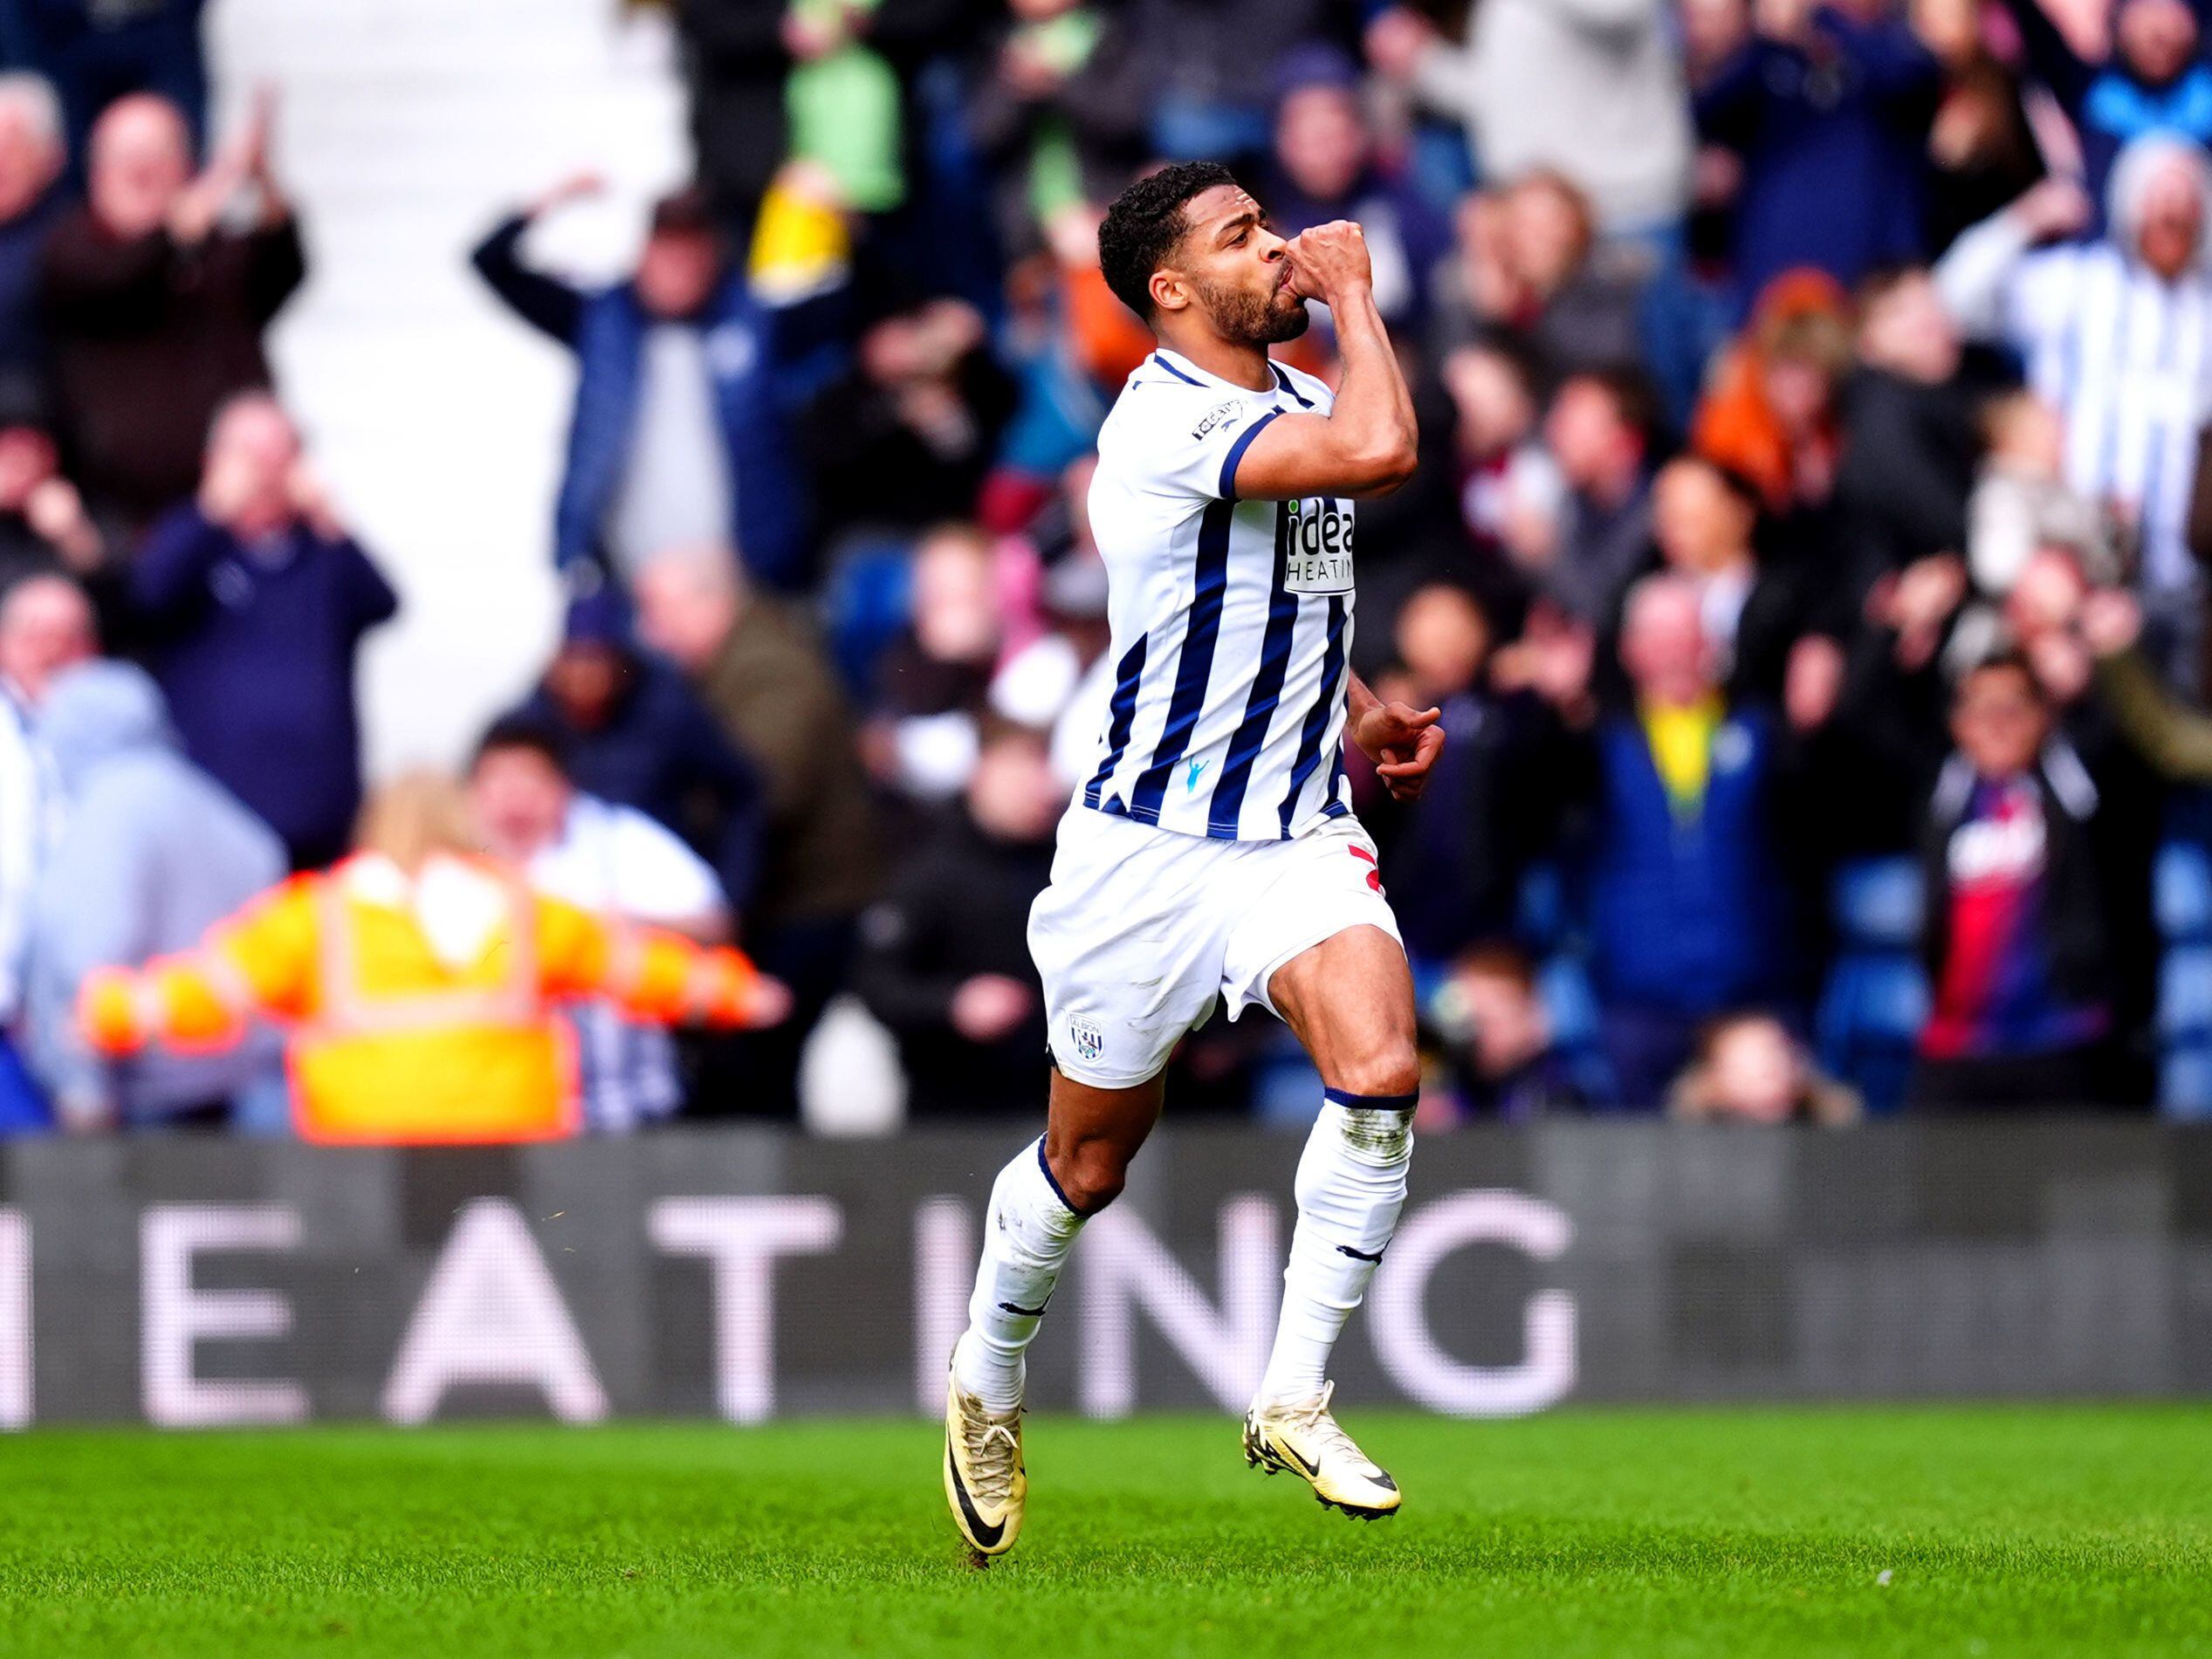 West Brom with a nod to Easter in their two bank holiday comebacks